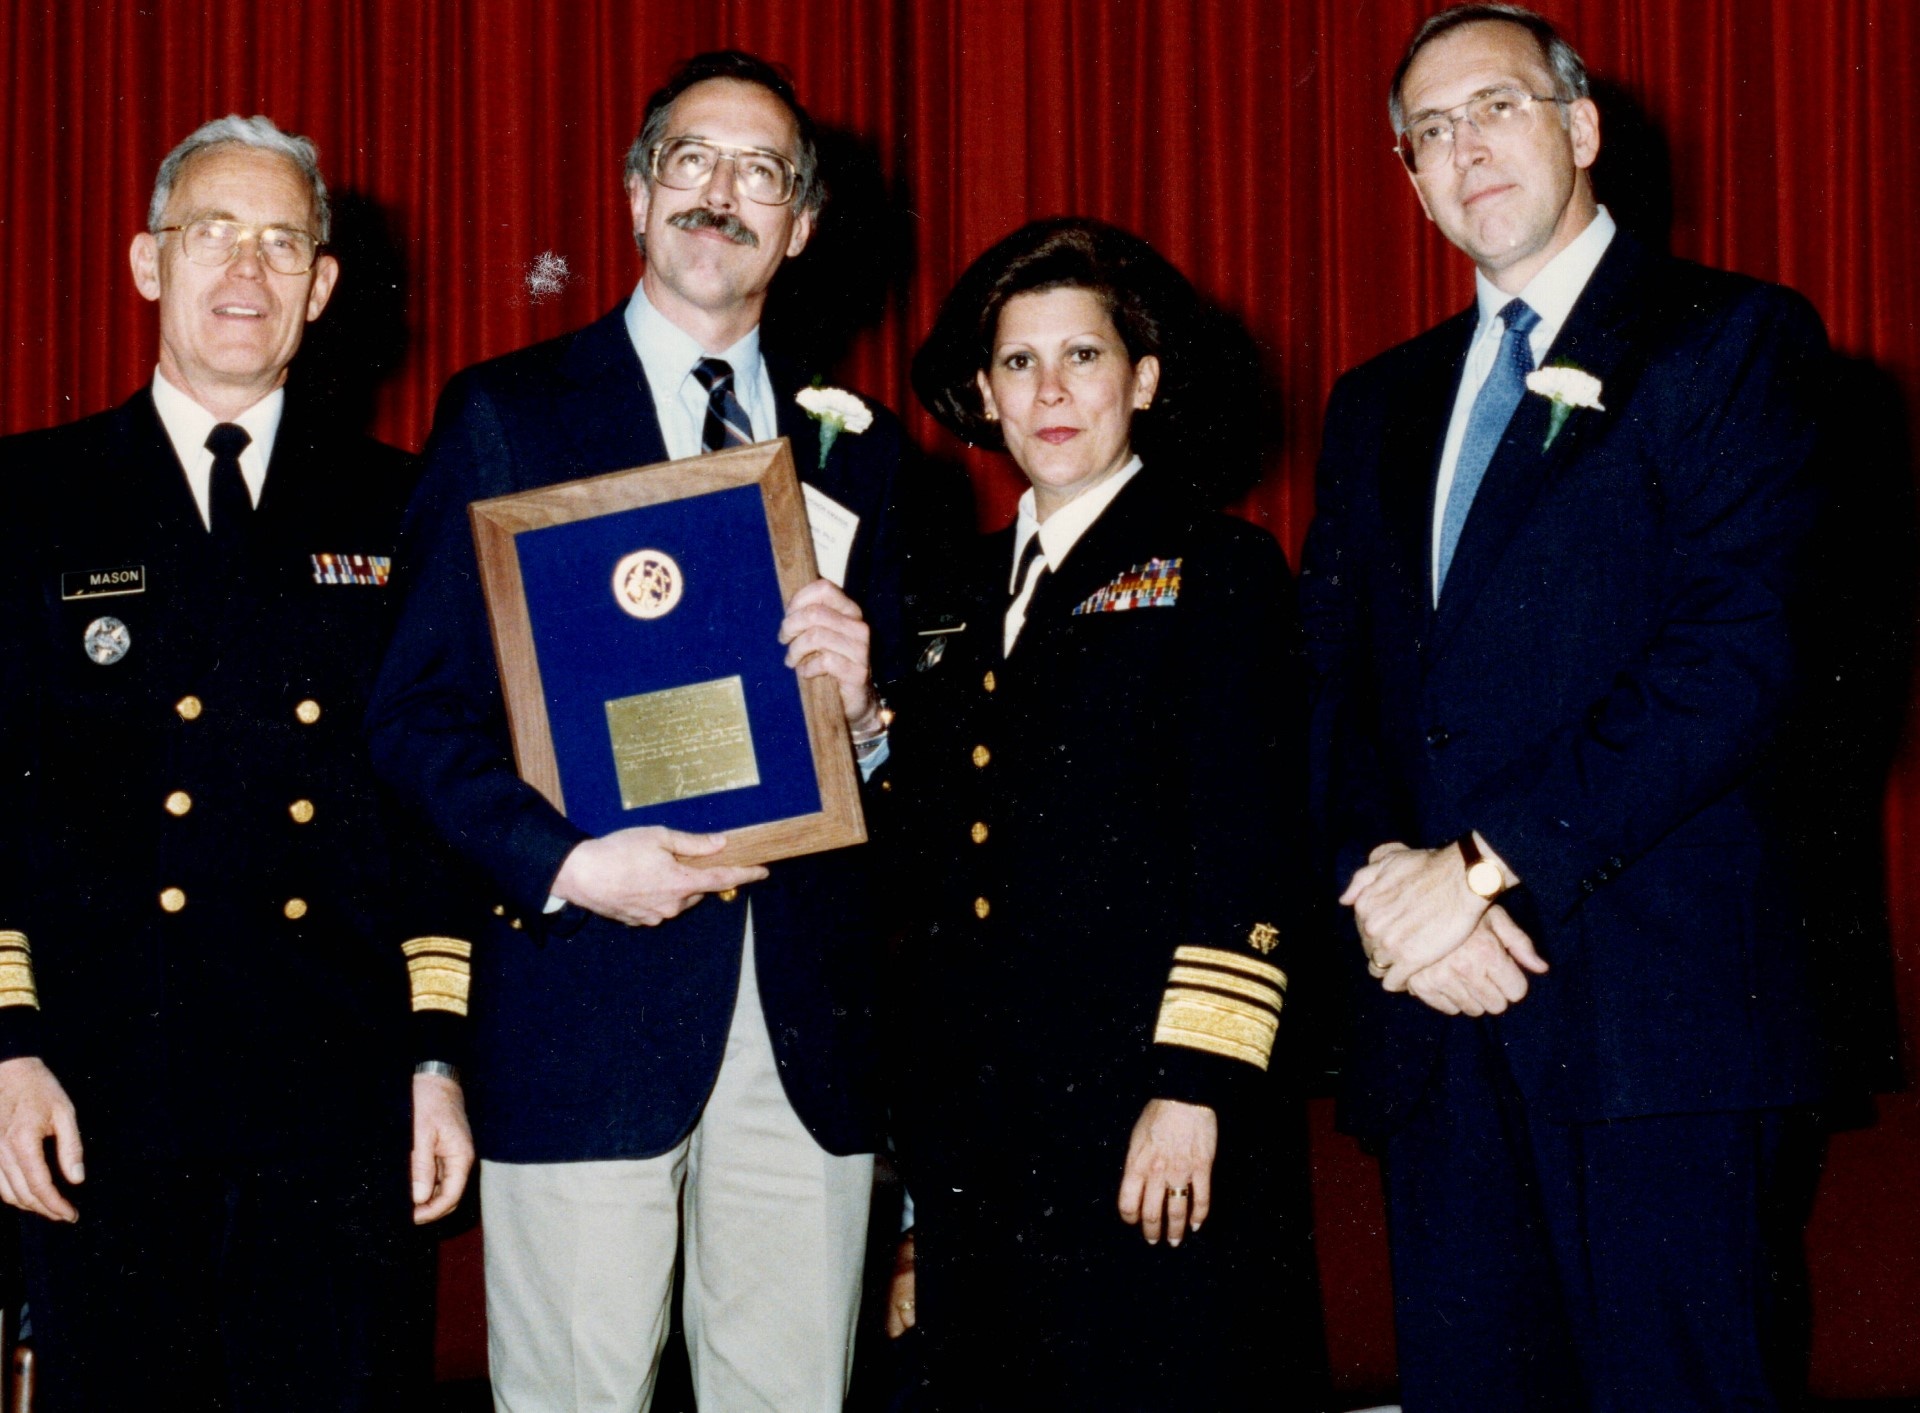 1990 Superior Service Award for AIDS infection model. All are in dress uniforms of the Public Health Service and Kindt holds a citation.